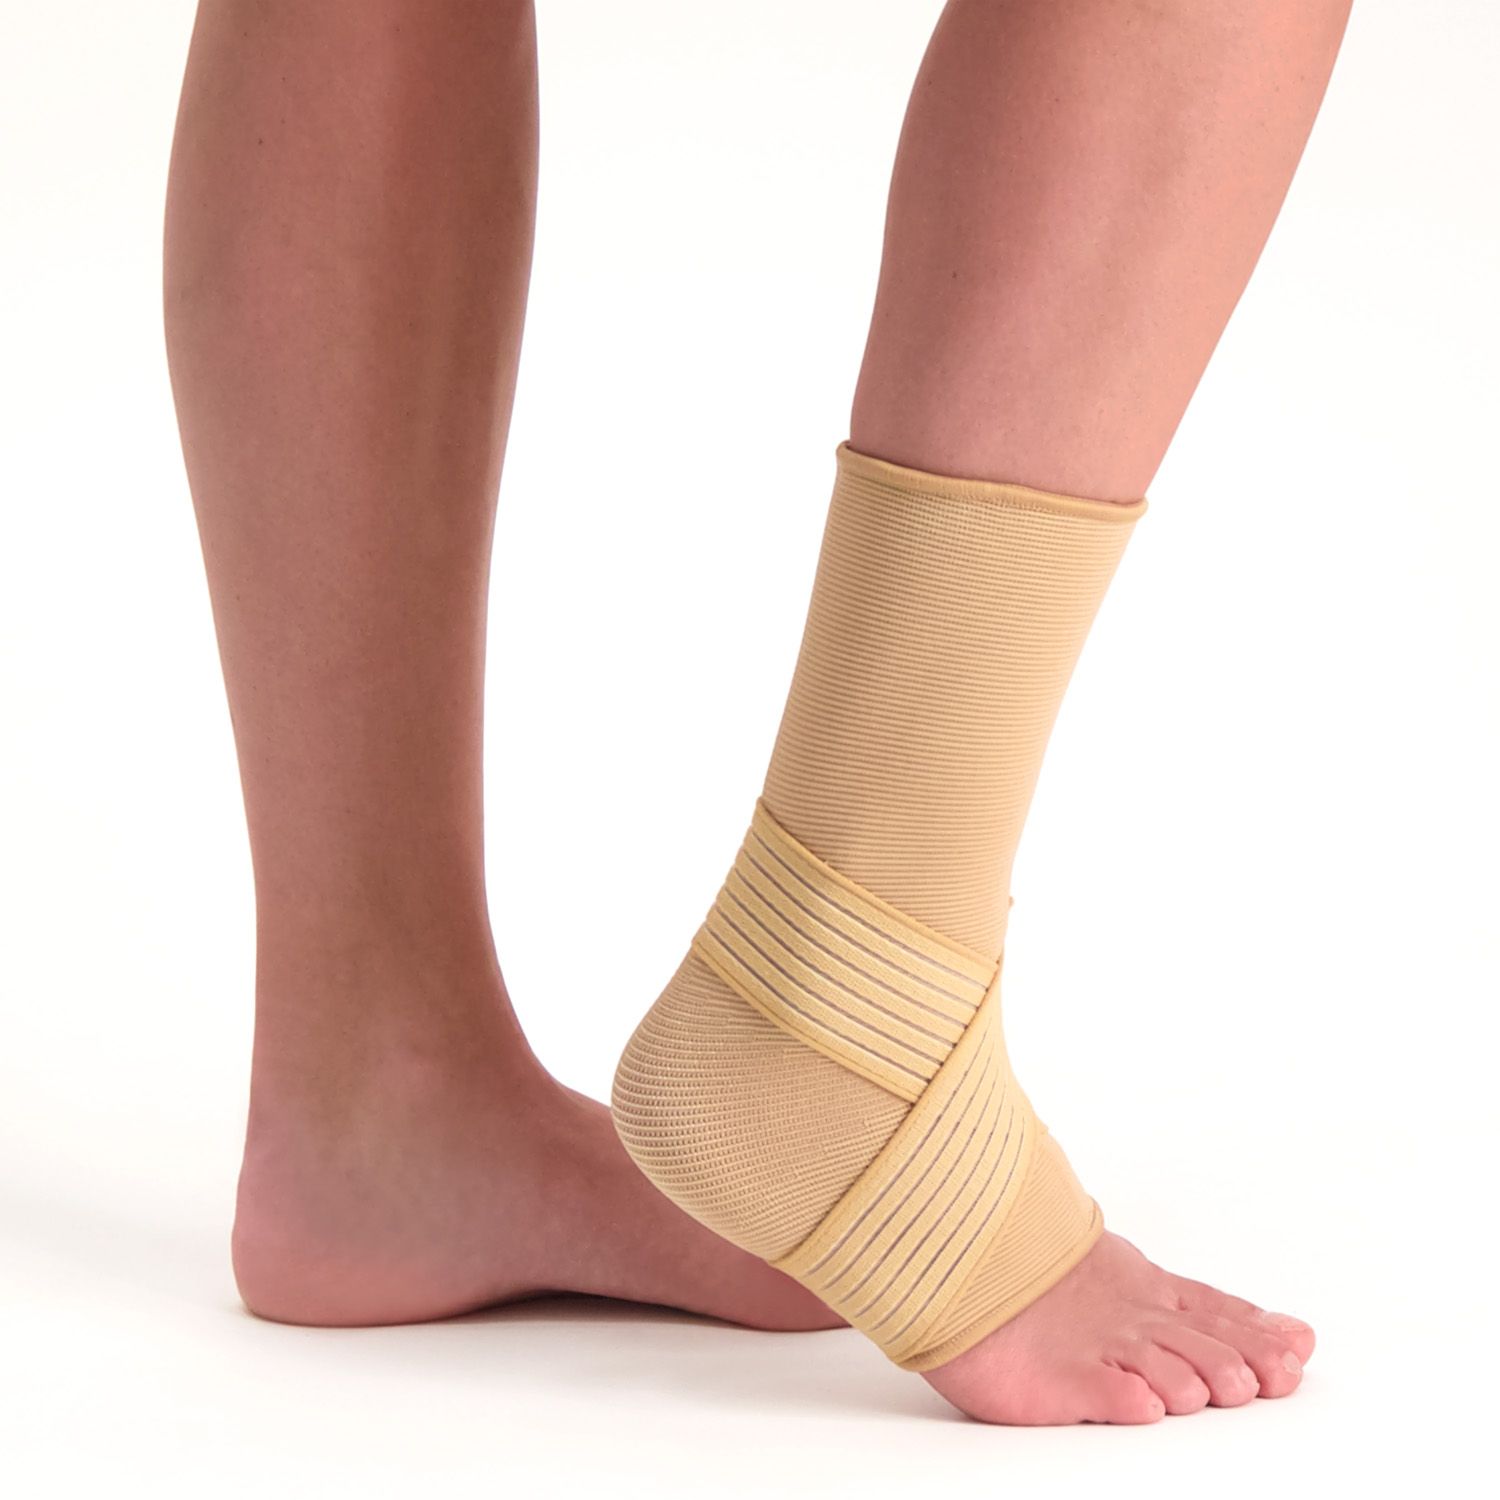 dunimed premium ankle support Velcro straps shown